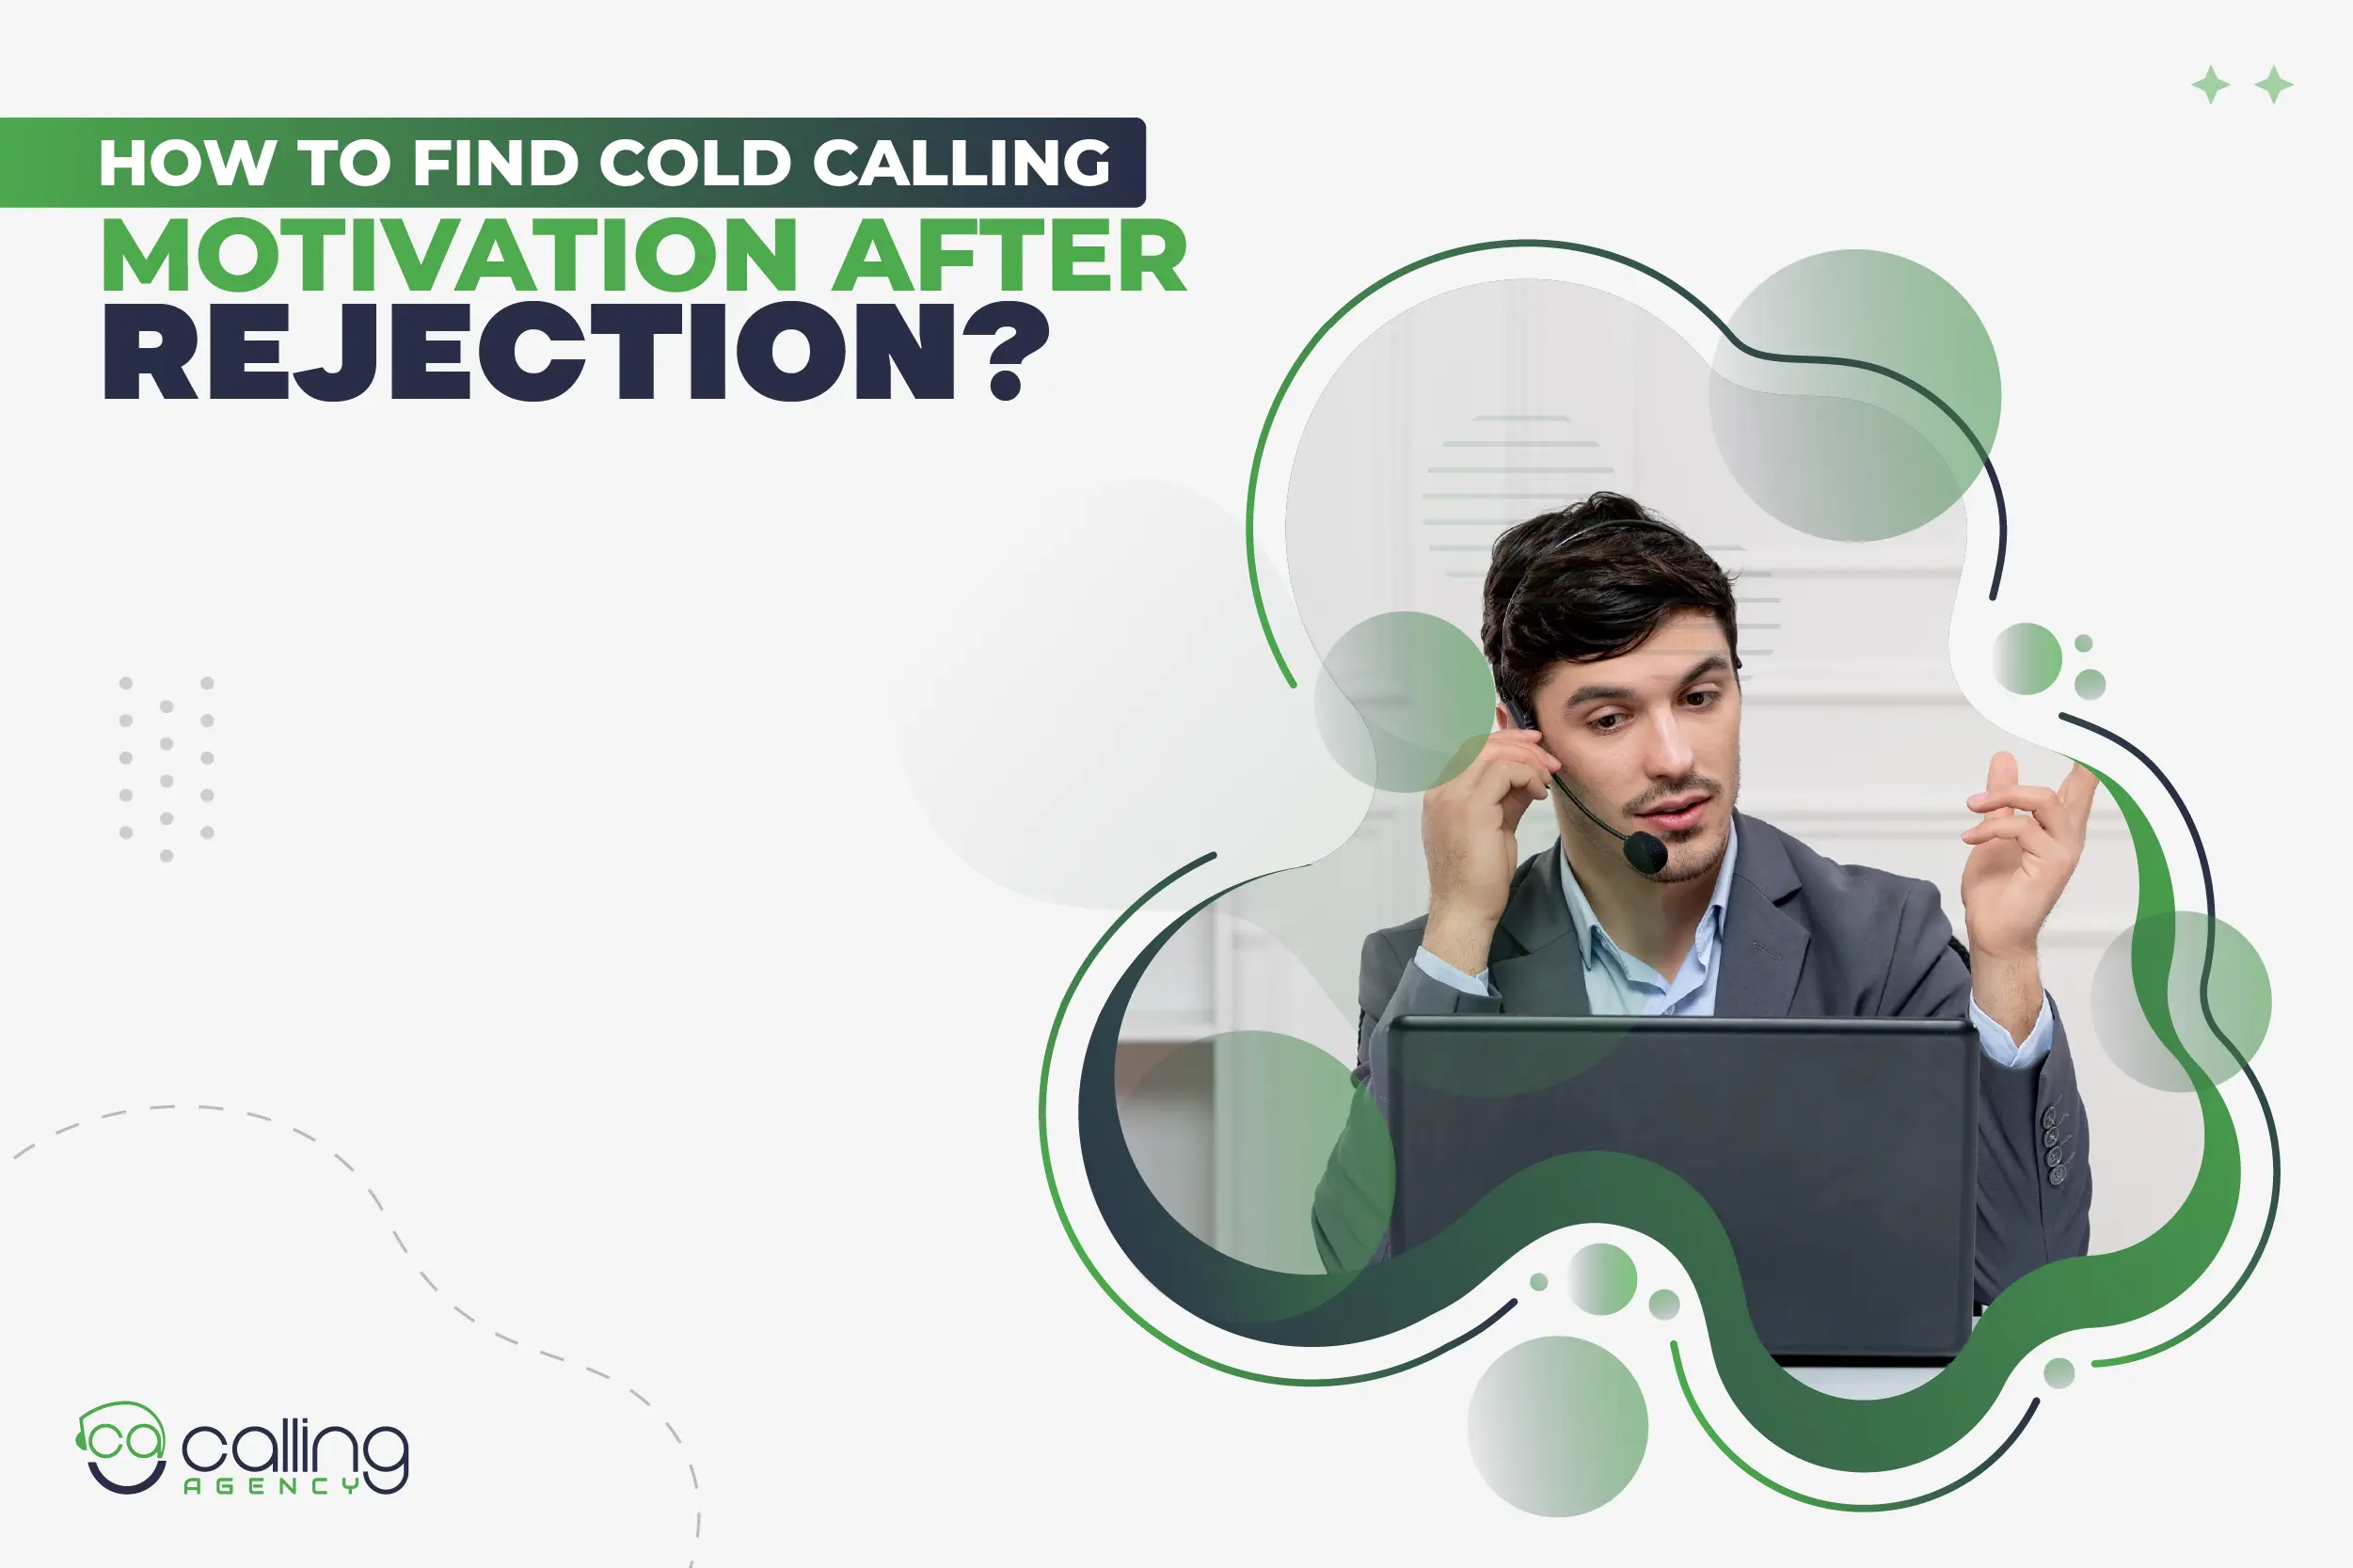 How to Find Cold Calling Motivation After Rejection?